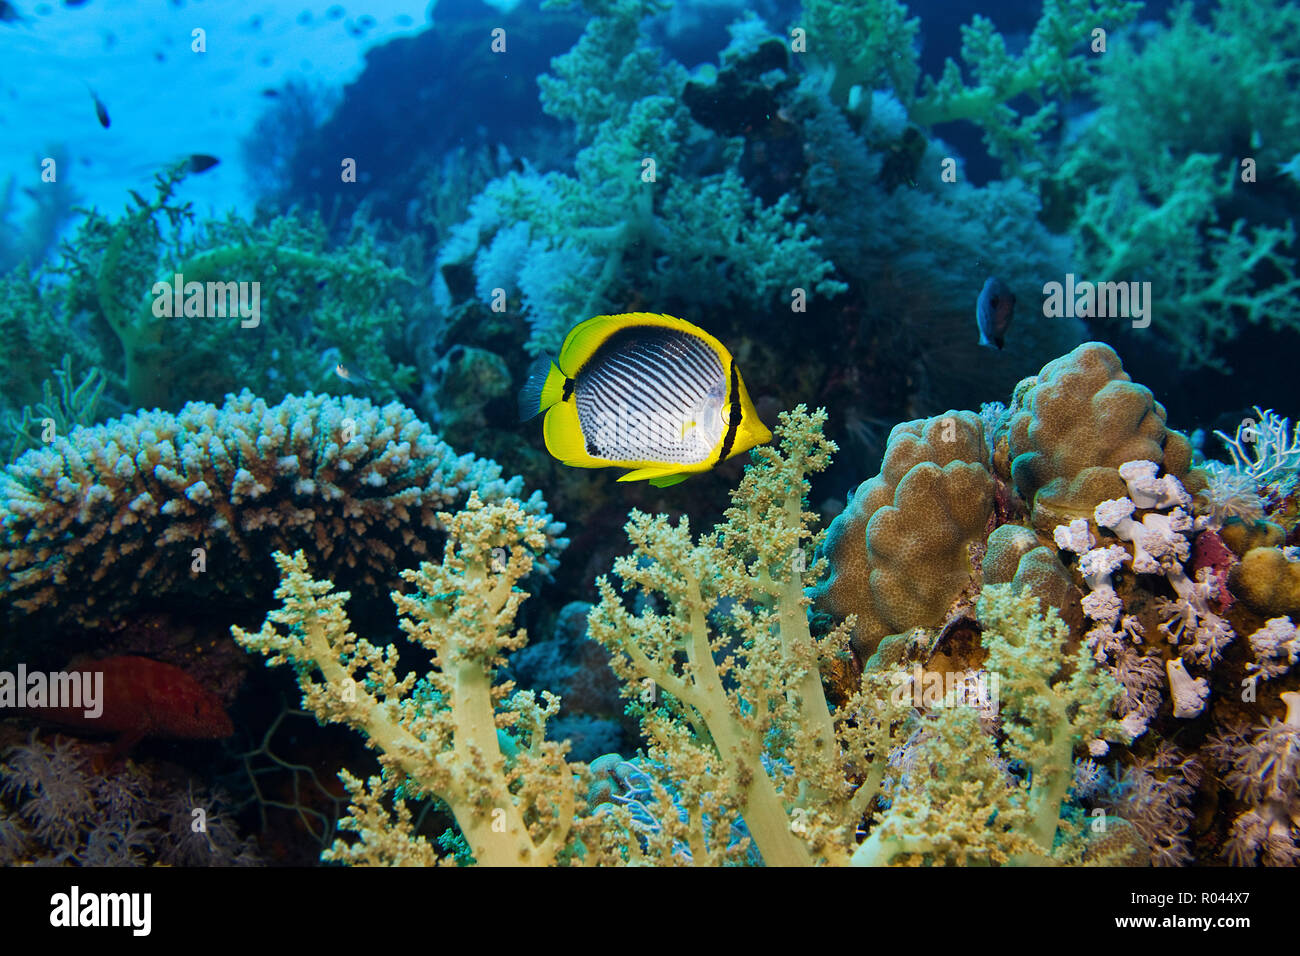 Black-backed butterflyfish (Chaetodon melannotus) at a coral reef, Saparua, Cape Paperu, Moluccas, Indonesia Stock Photo